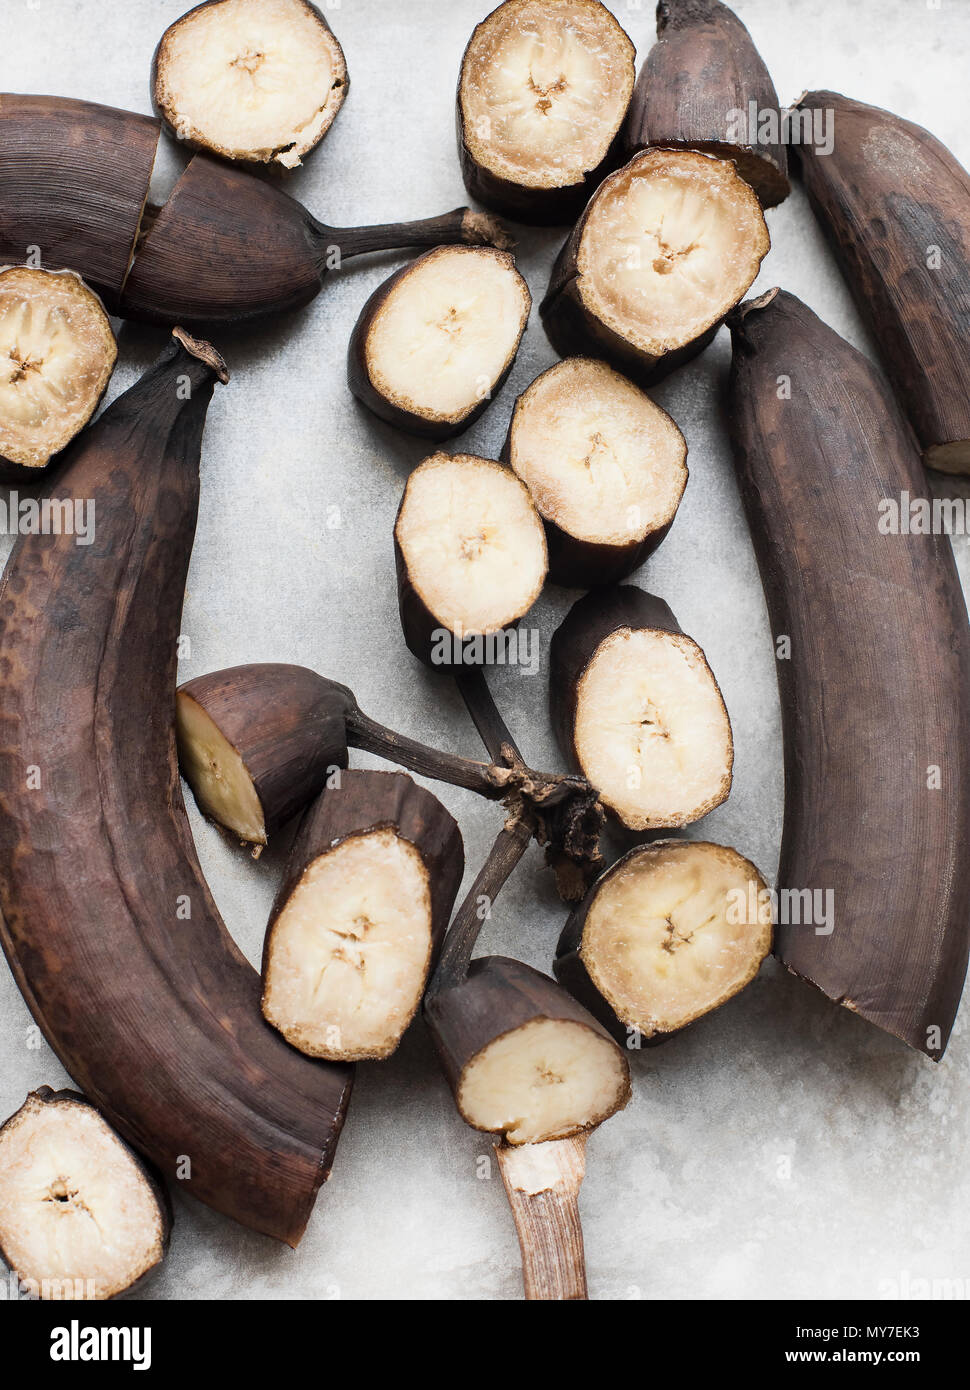 Still life of rotting bananas, sliced and whole, overhead view Stock Photo